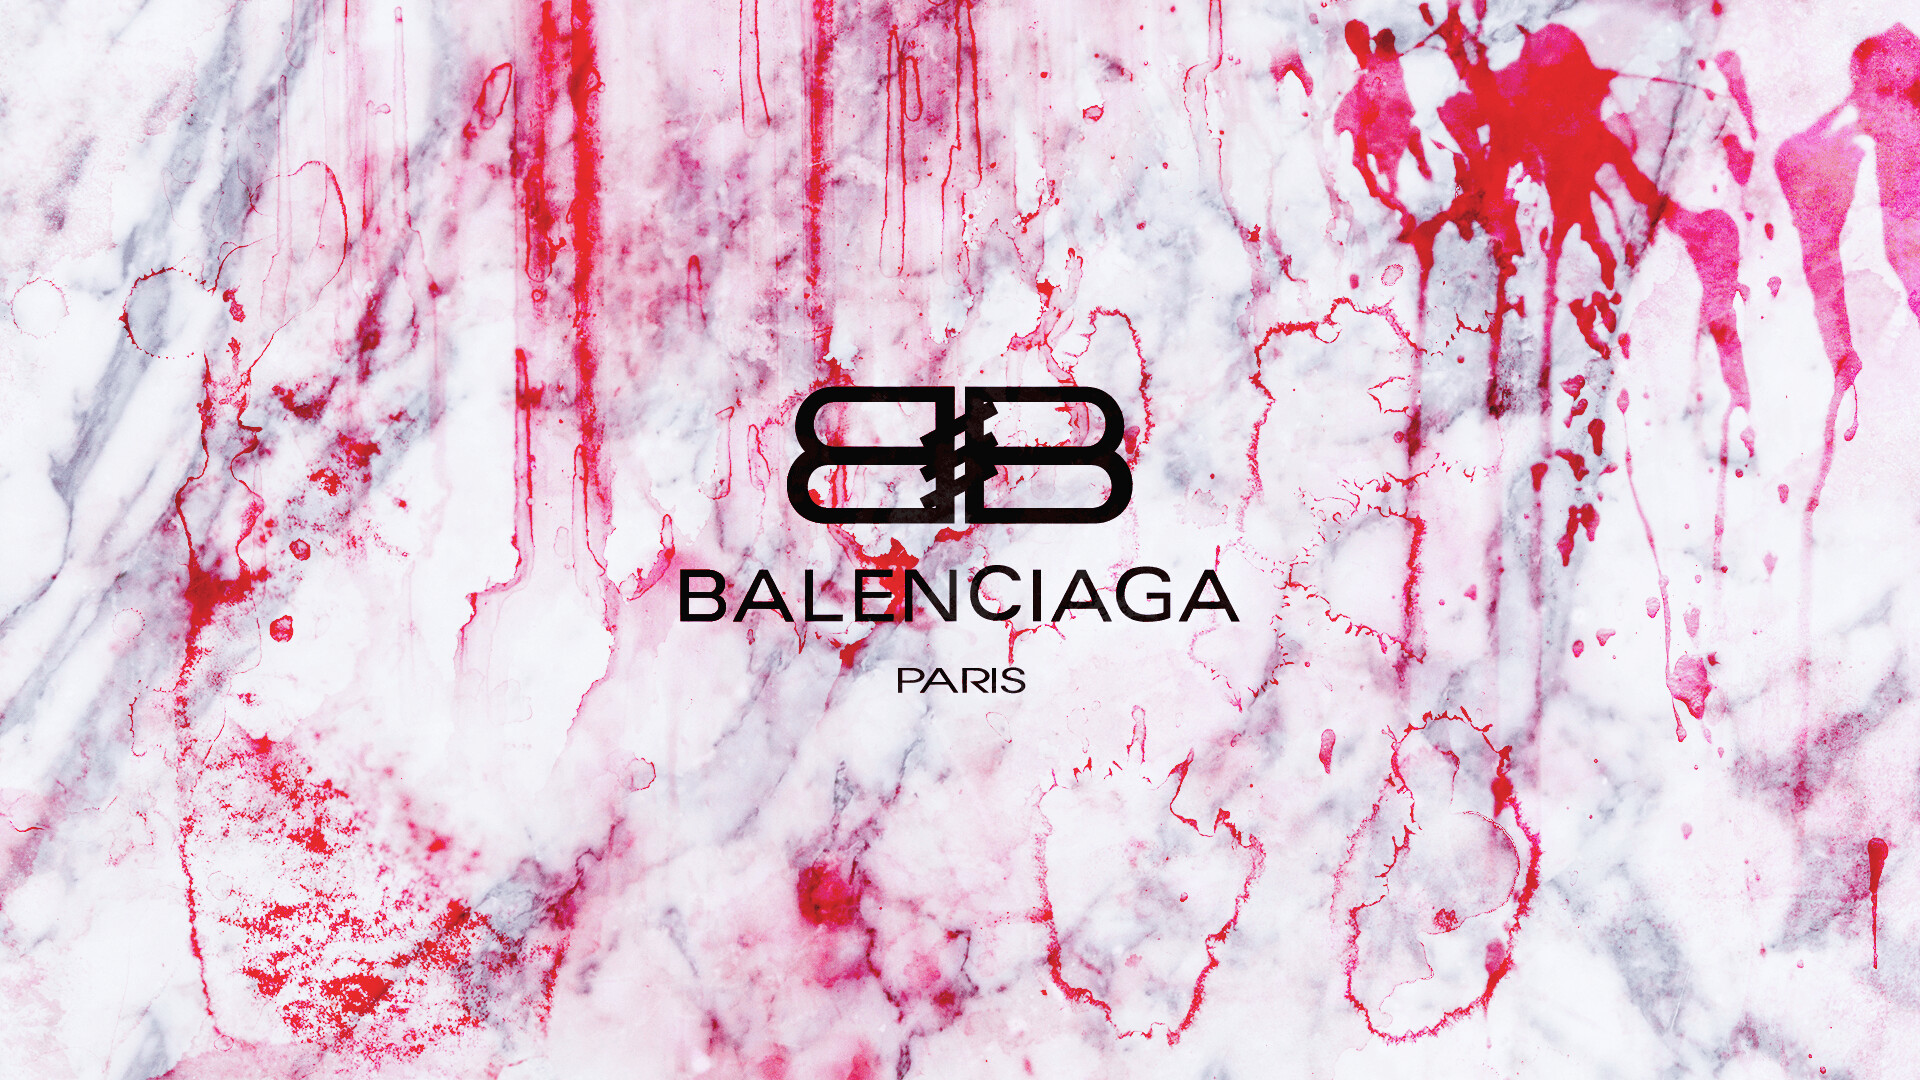 Balenciaga: A range of designer shoes, bags, and accessories, Logo. 1920x1080 Full HD Background.